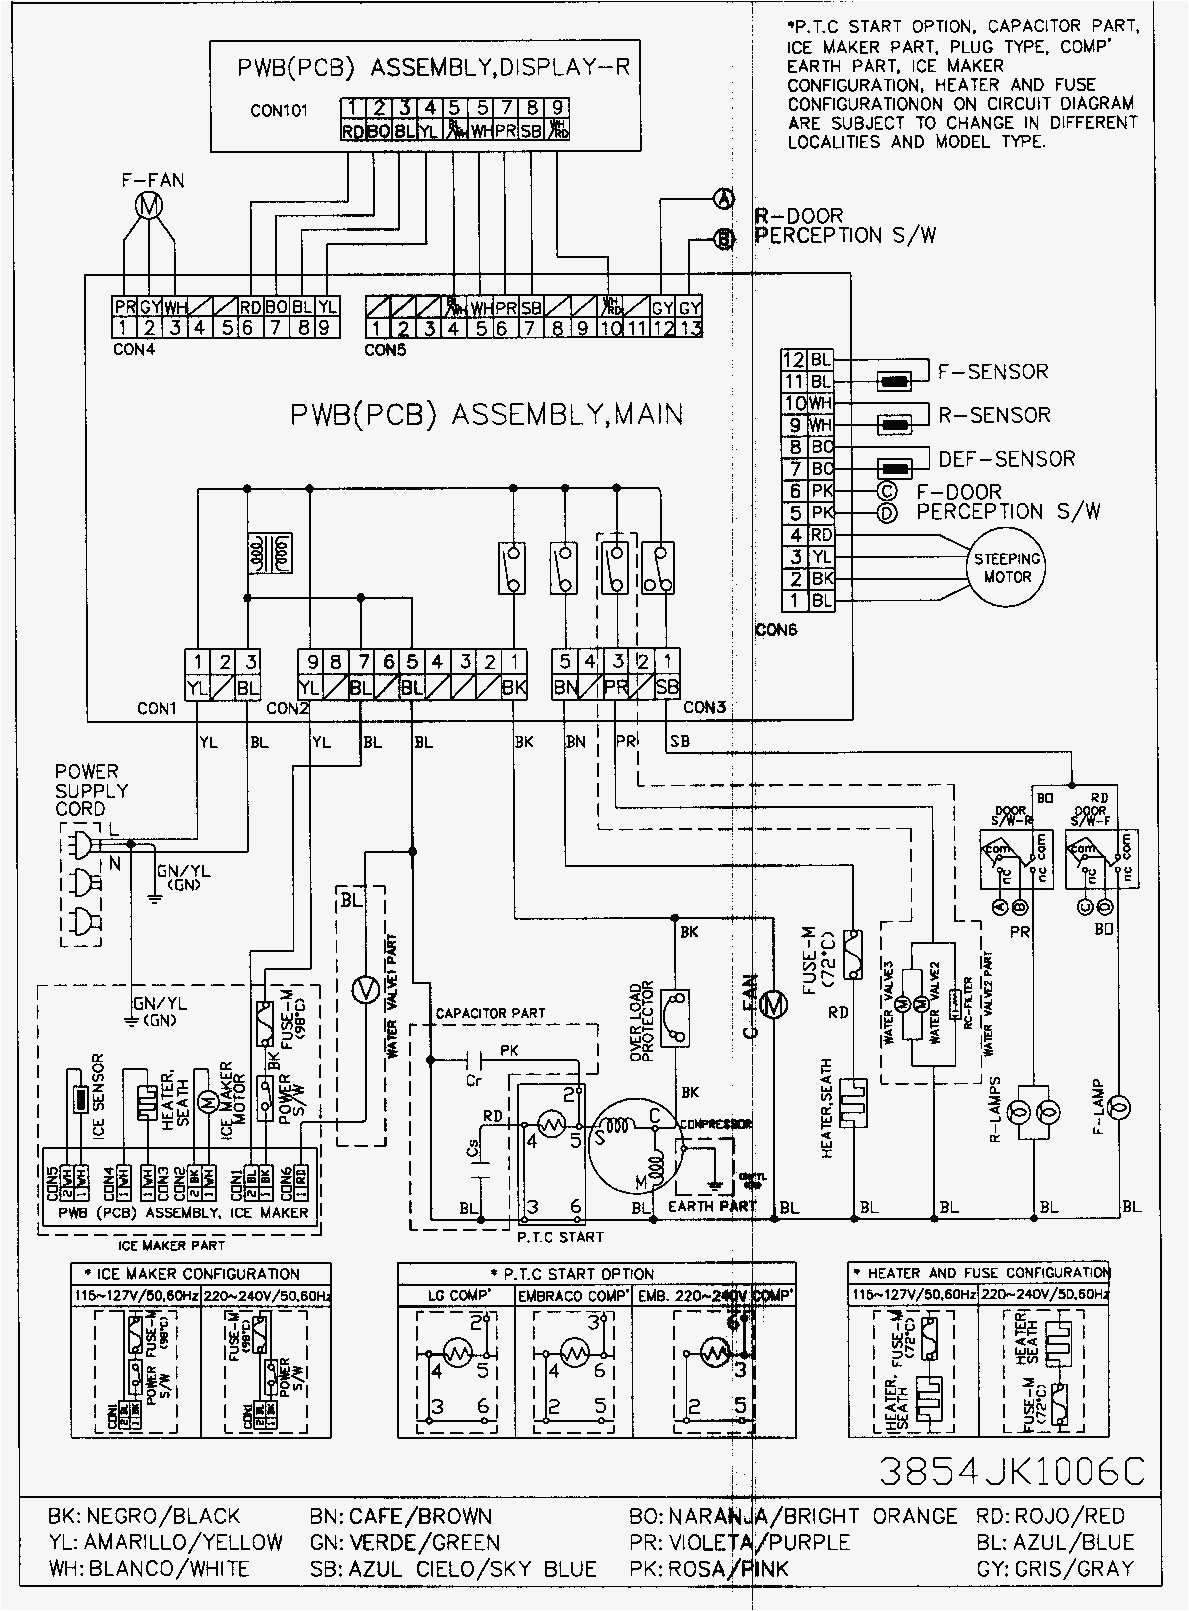 samsung refrigerator parts manual lovely whirlpool within wiring diagram png